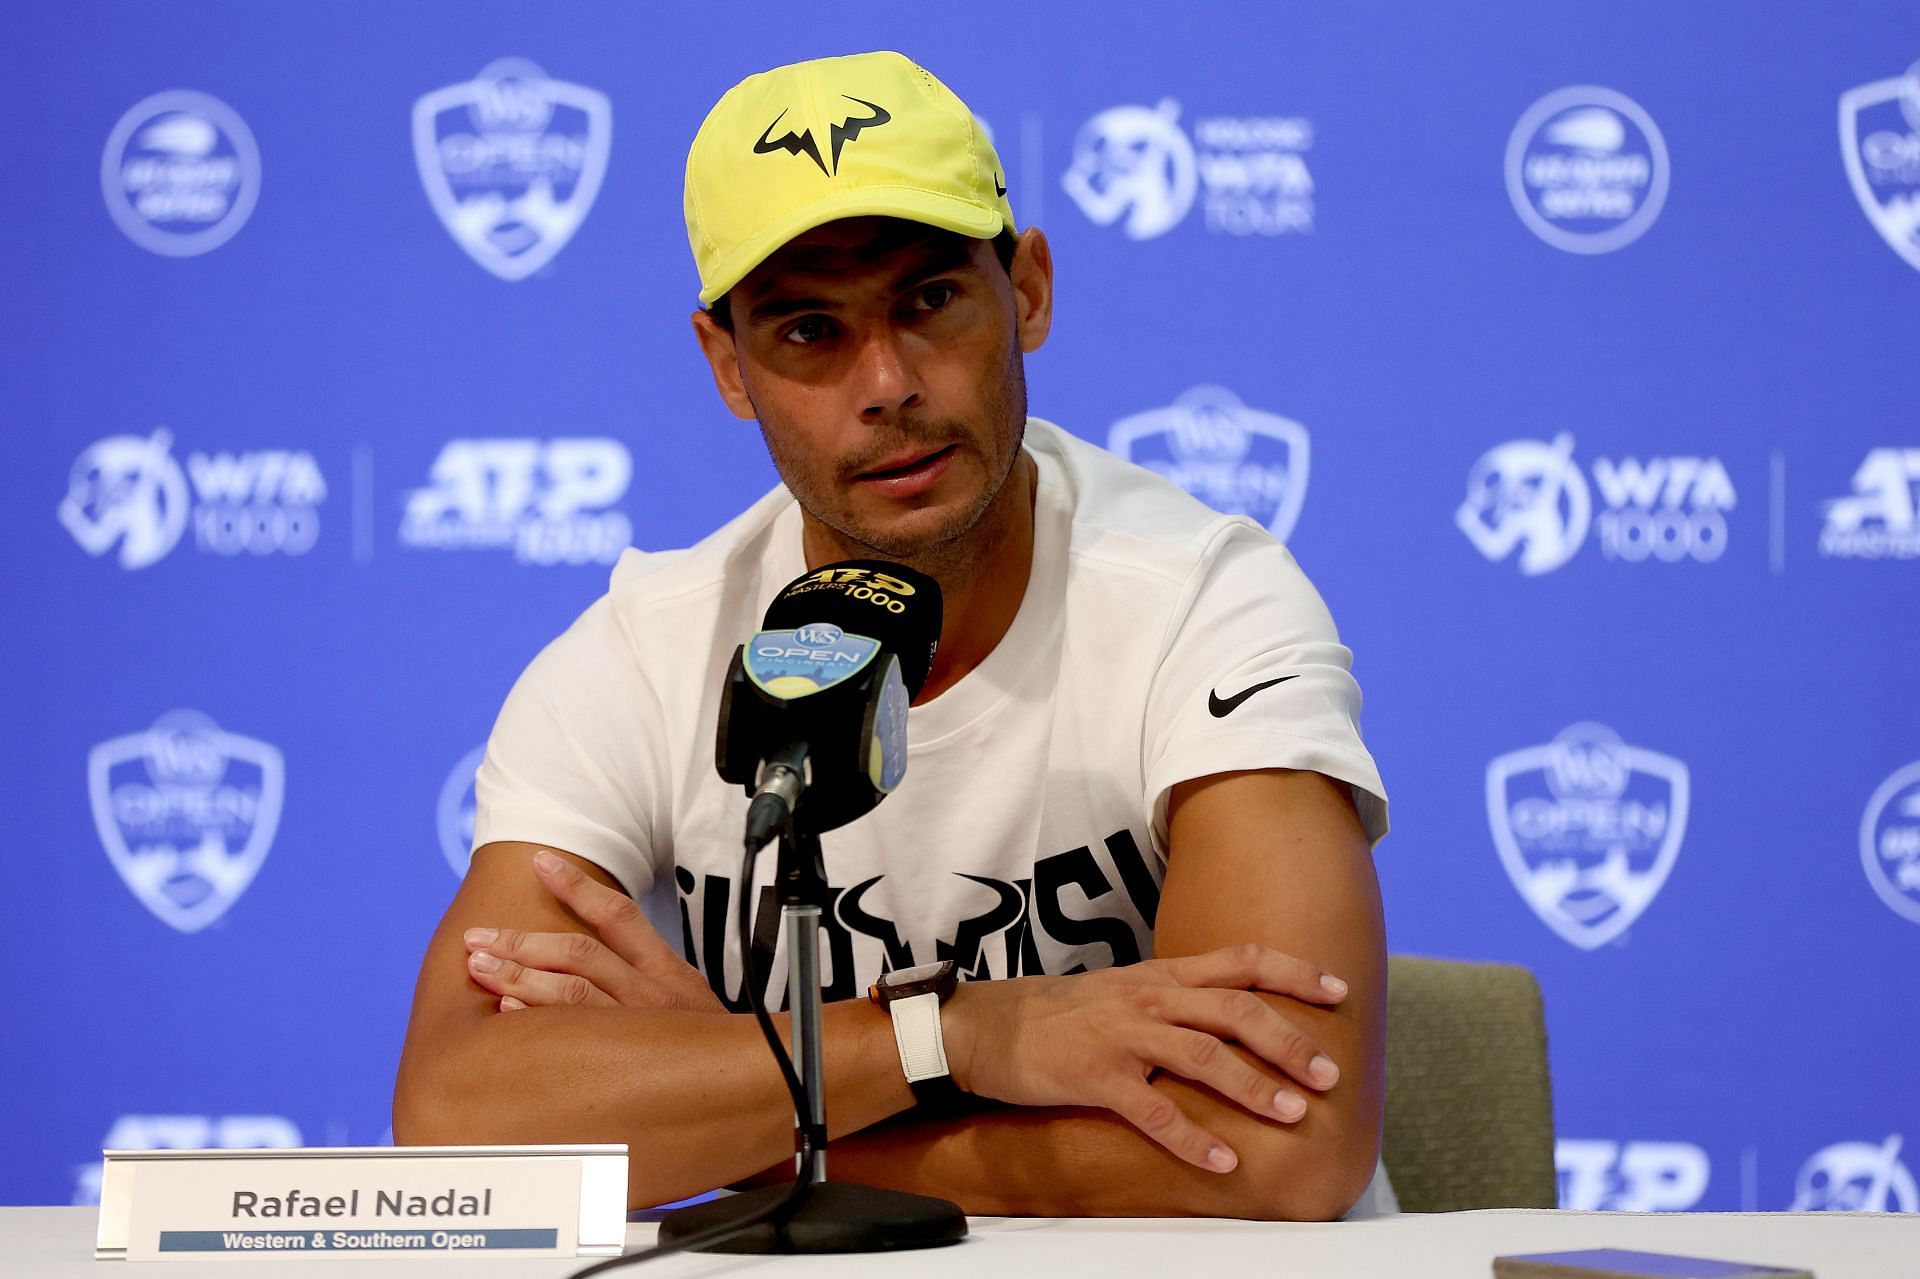 Rafael Nadal is the second seed at the US Open